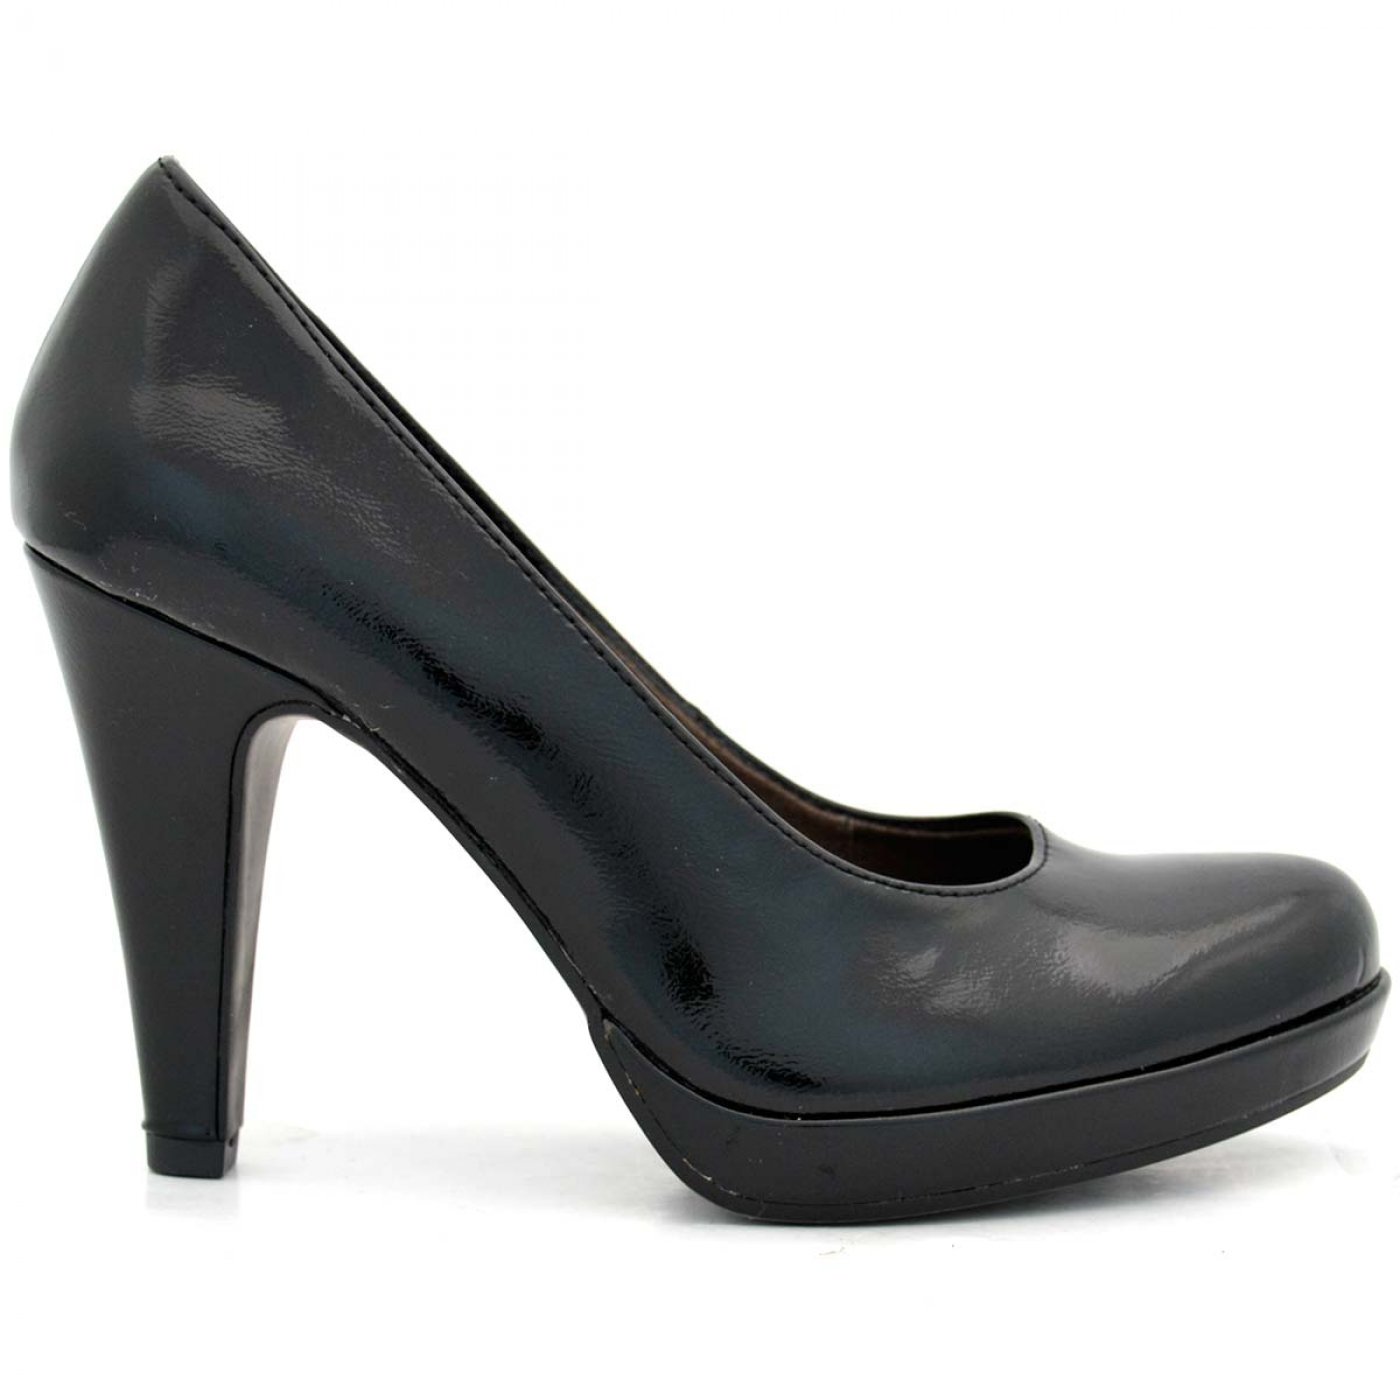 classy black color formal shoes for women | tamaris germany OWIVETH